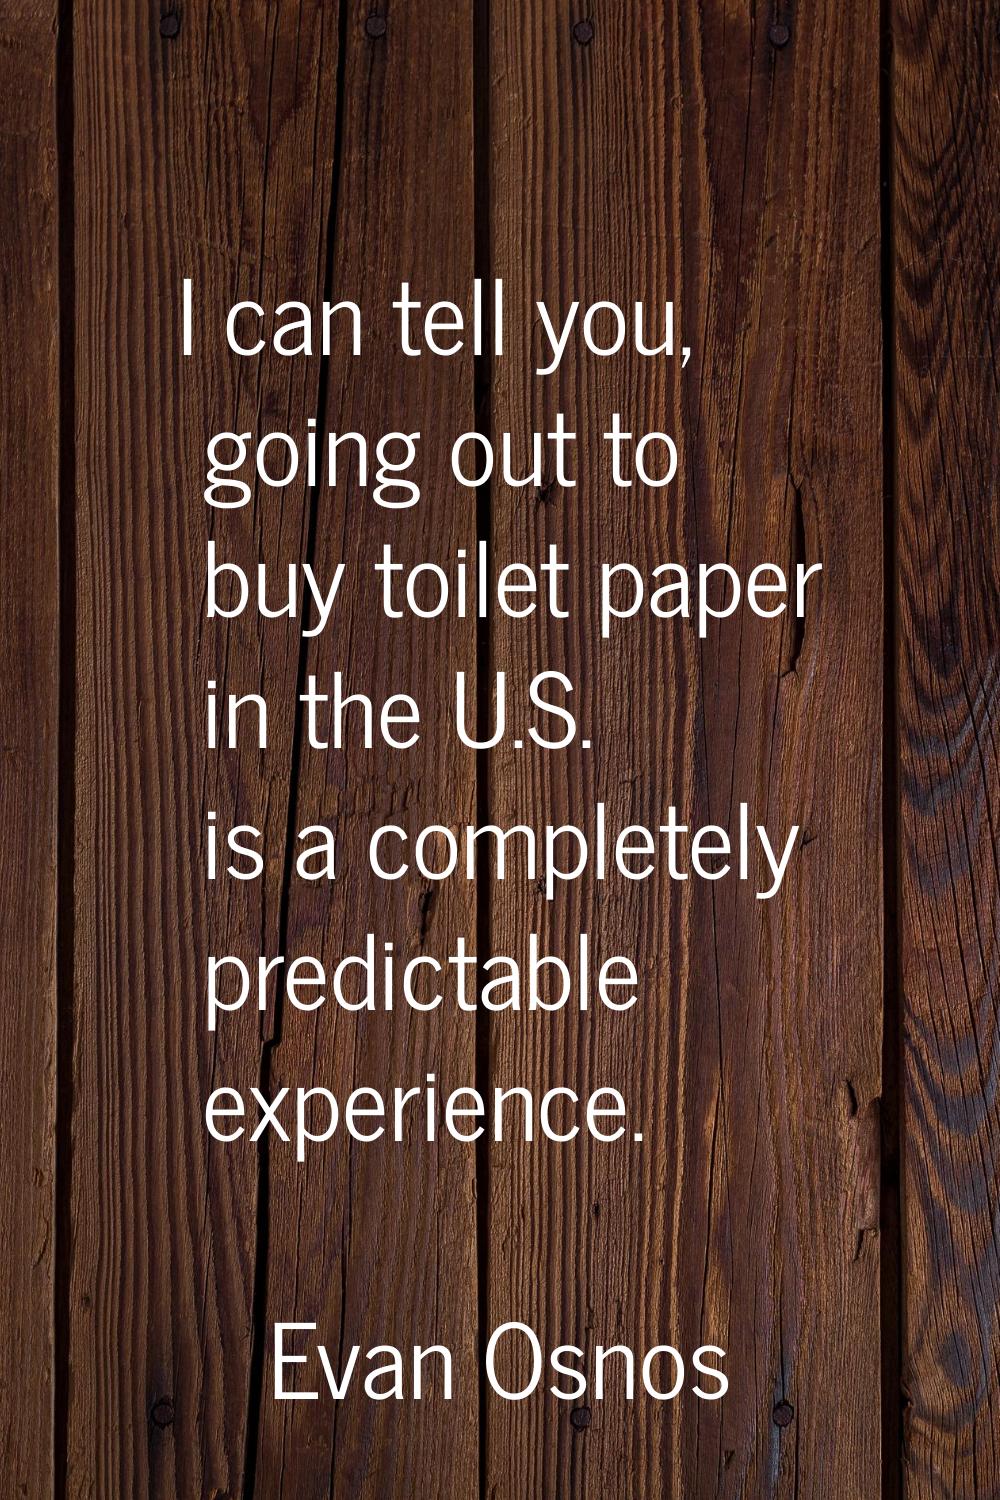 I can tell you, going out to buy toilet paper in the U.S. is a completely predictable experience.